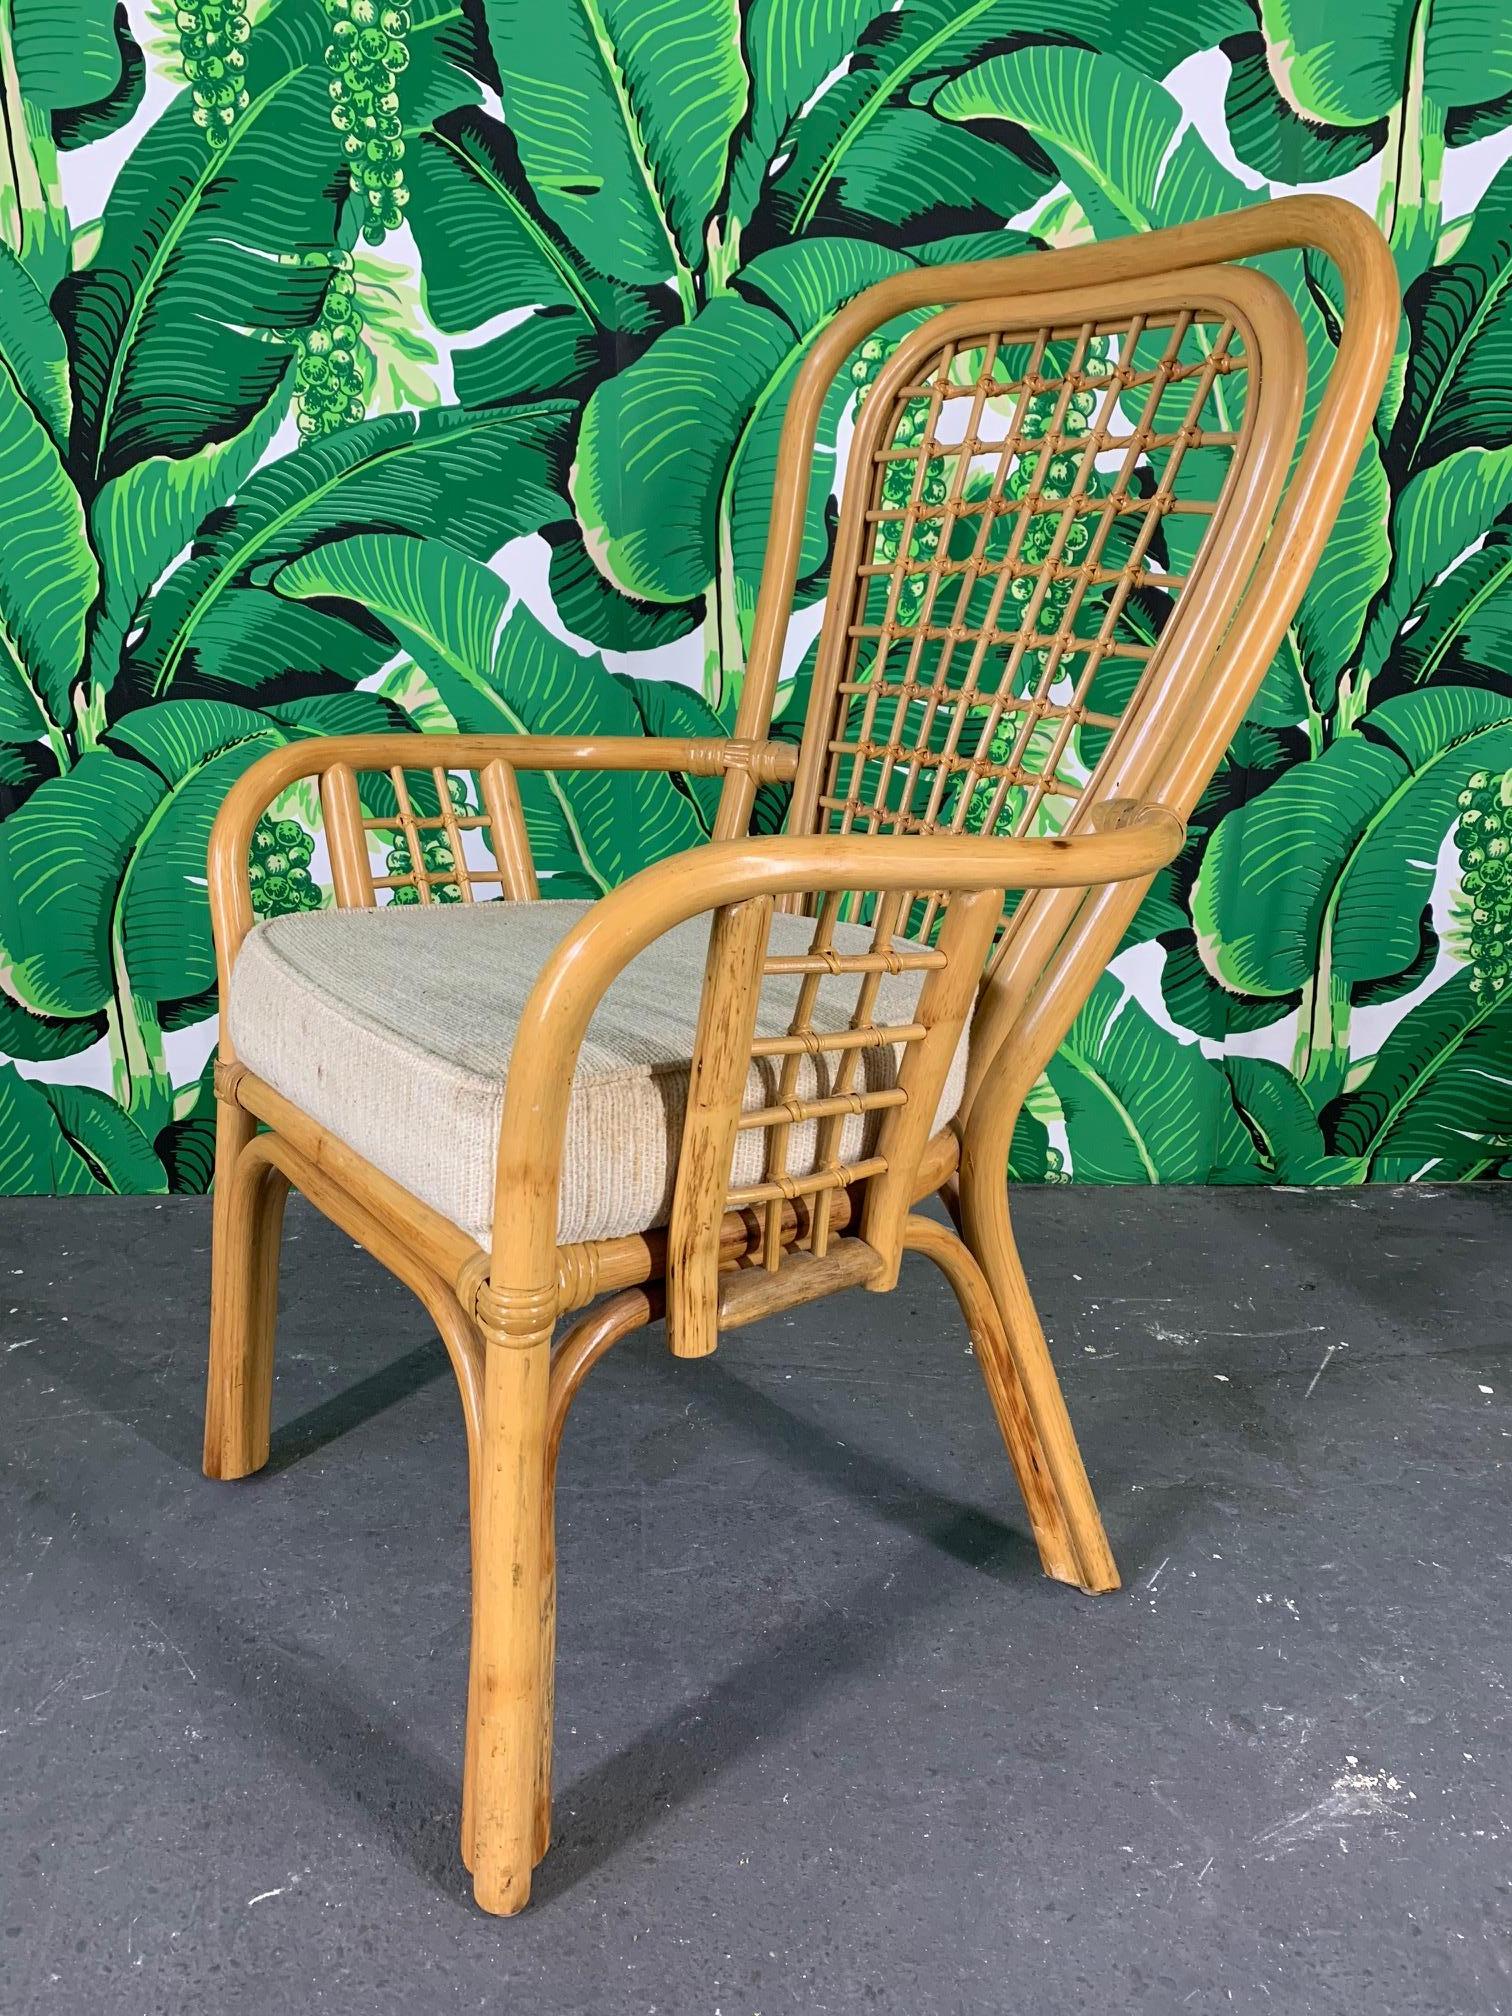 Set of 4 rattan dining chairs feature a fan back design and thick, upholstered seats. Very good vintage condition with only minor signs of age appropriate wear.